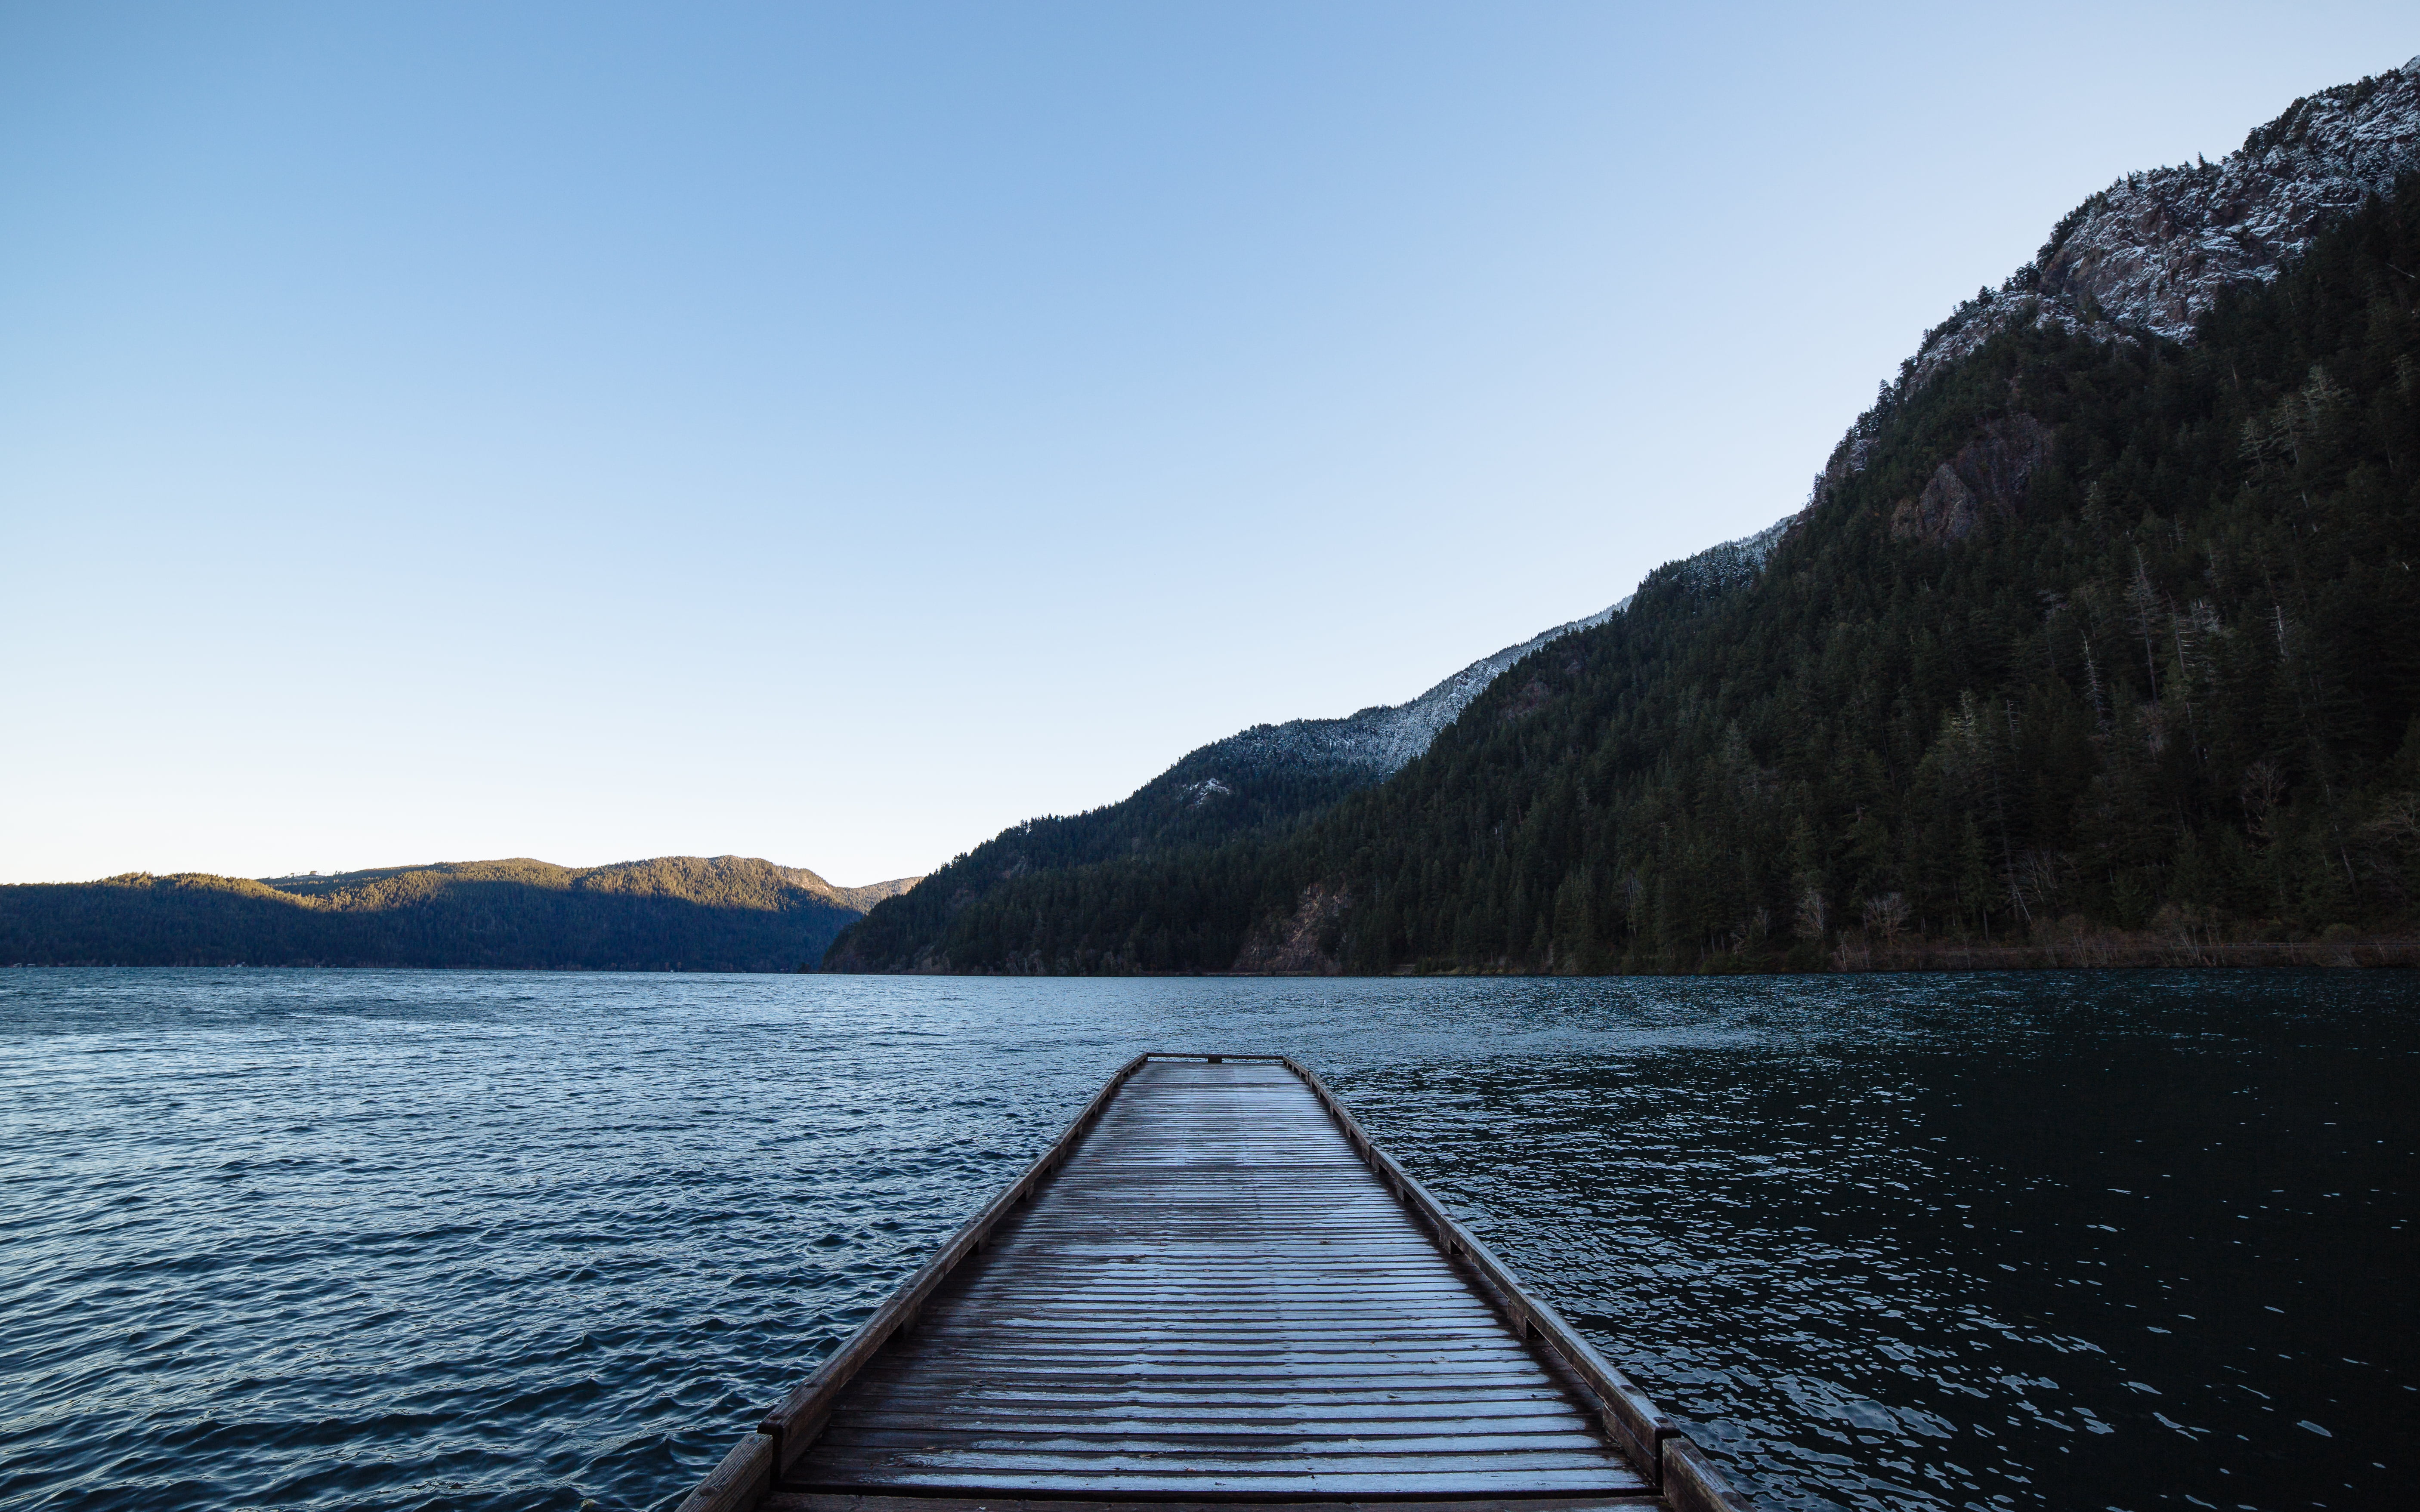 gray wooden dock in front of body of water and mountain